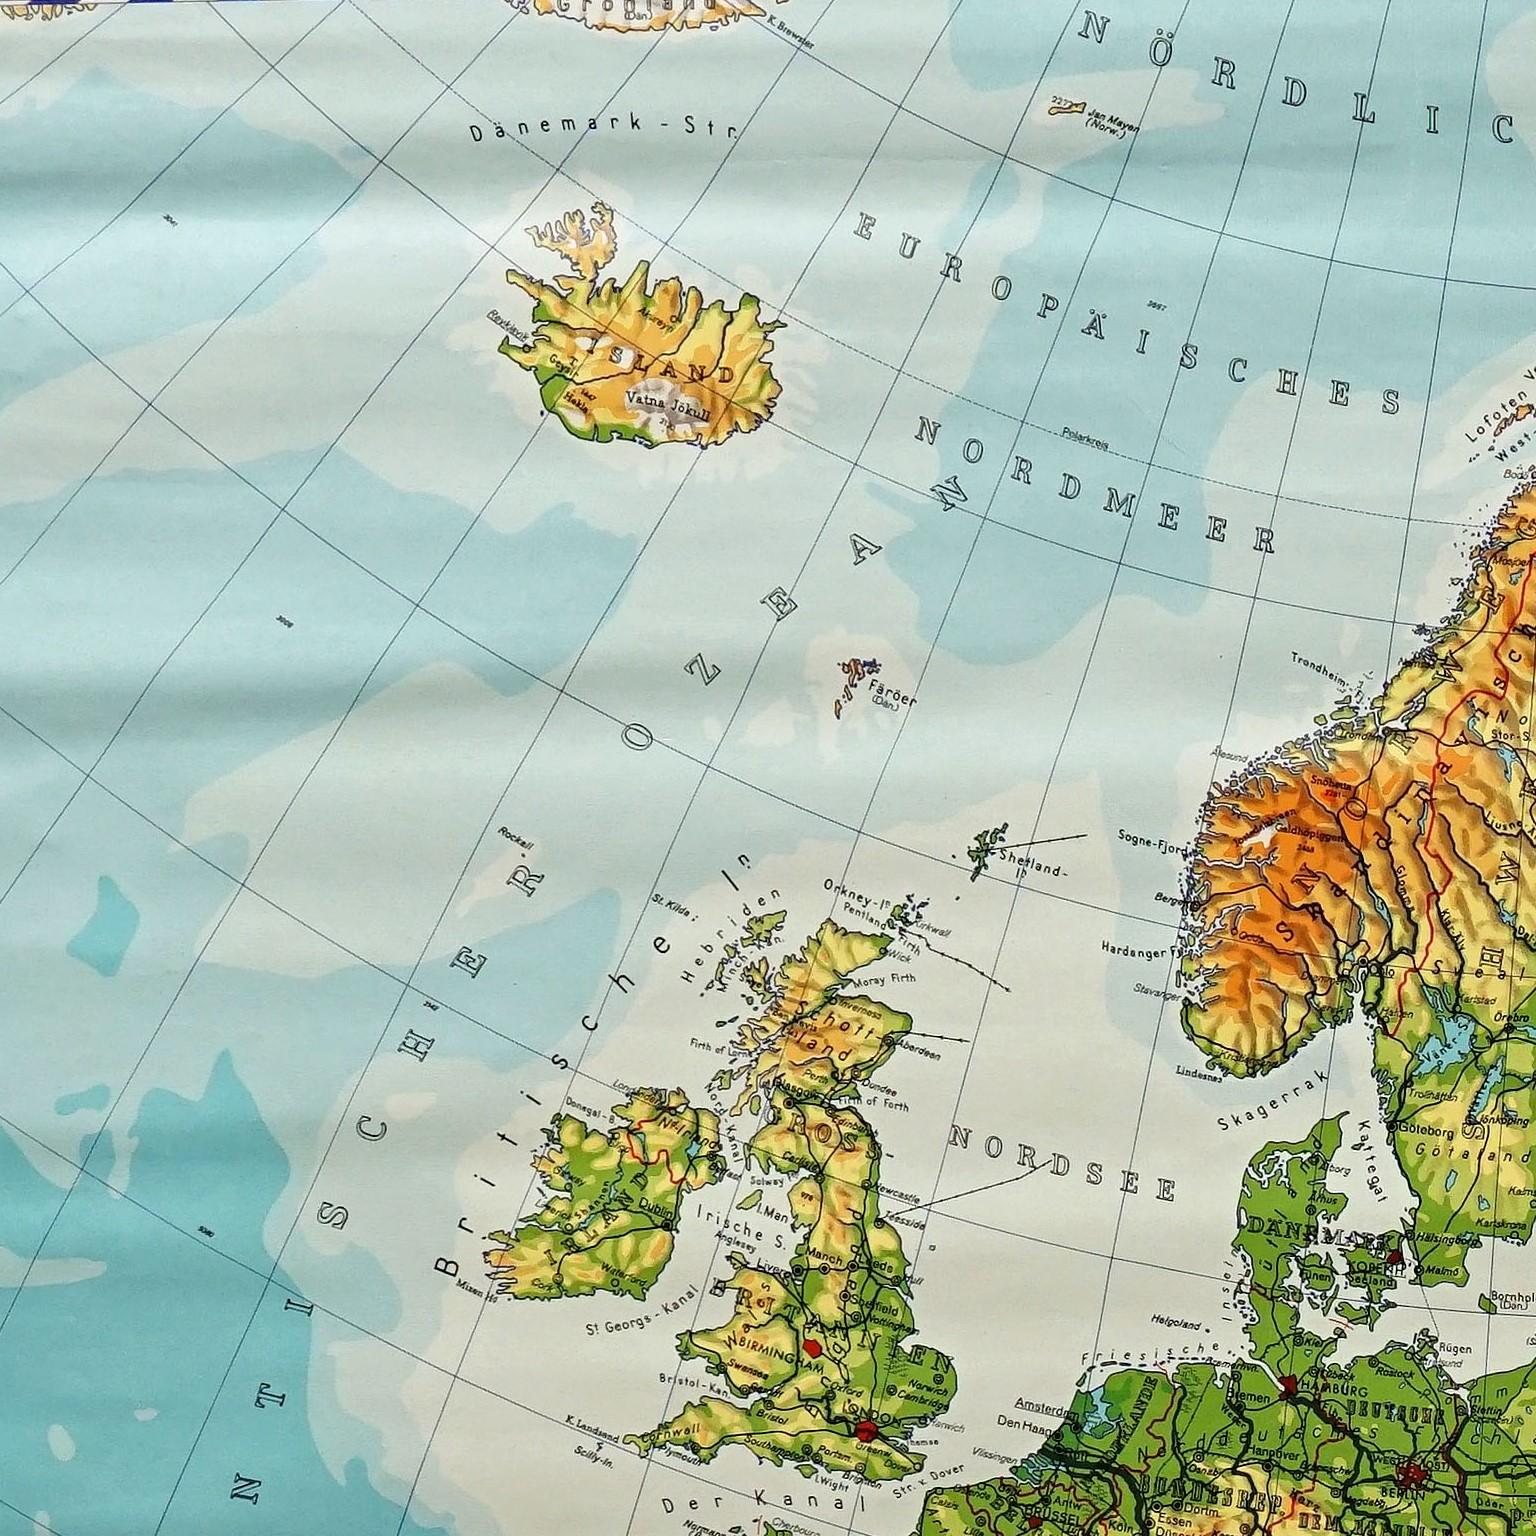 The vintage pull-down map shows the European continent / Europe. Published by Haack-Painke, Justus Perthes Darmstadt. Colorful print on paper reinforced with canvas.
Measurements:
Width 104 cm (40.95 inch)
Height 97 cm (38.19 inch)

The measurements